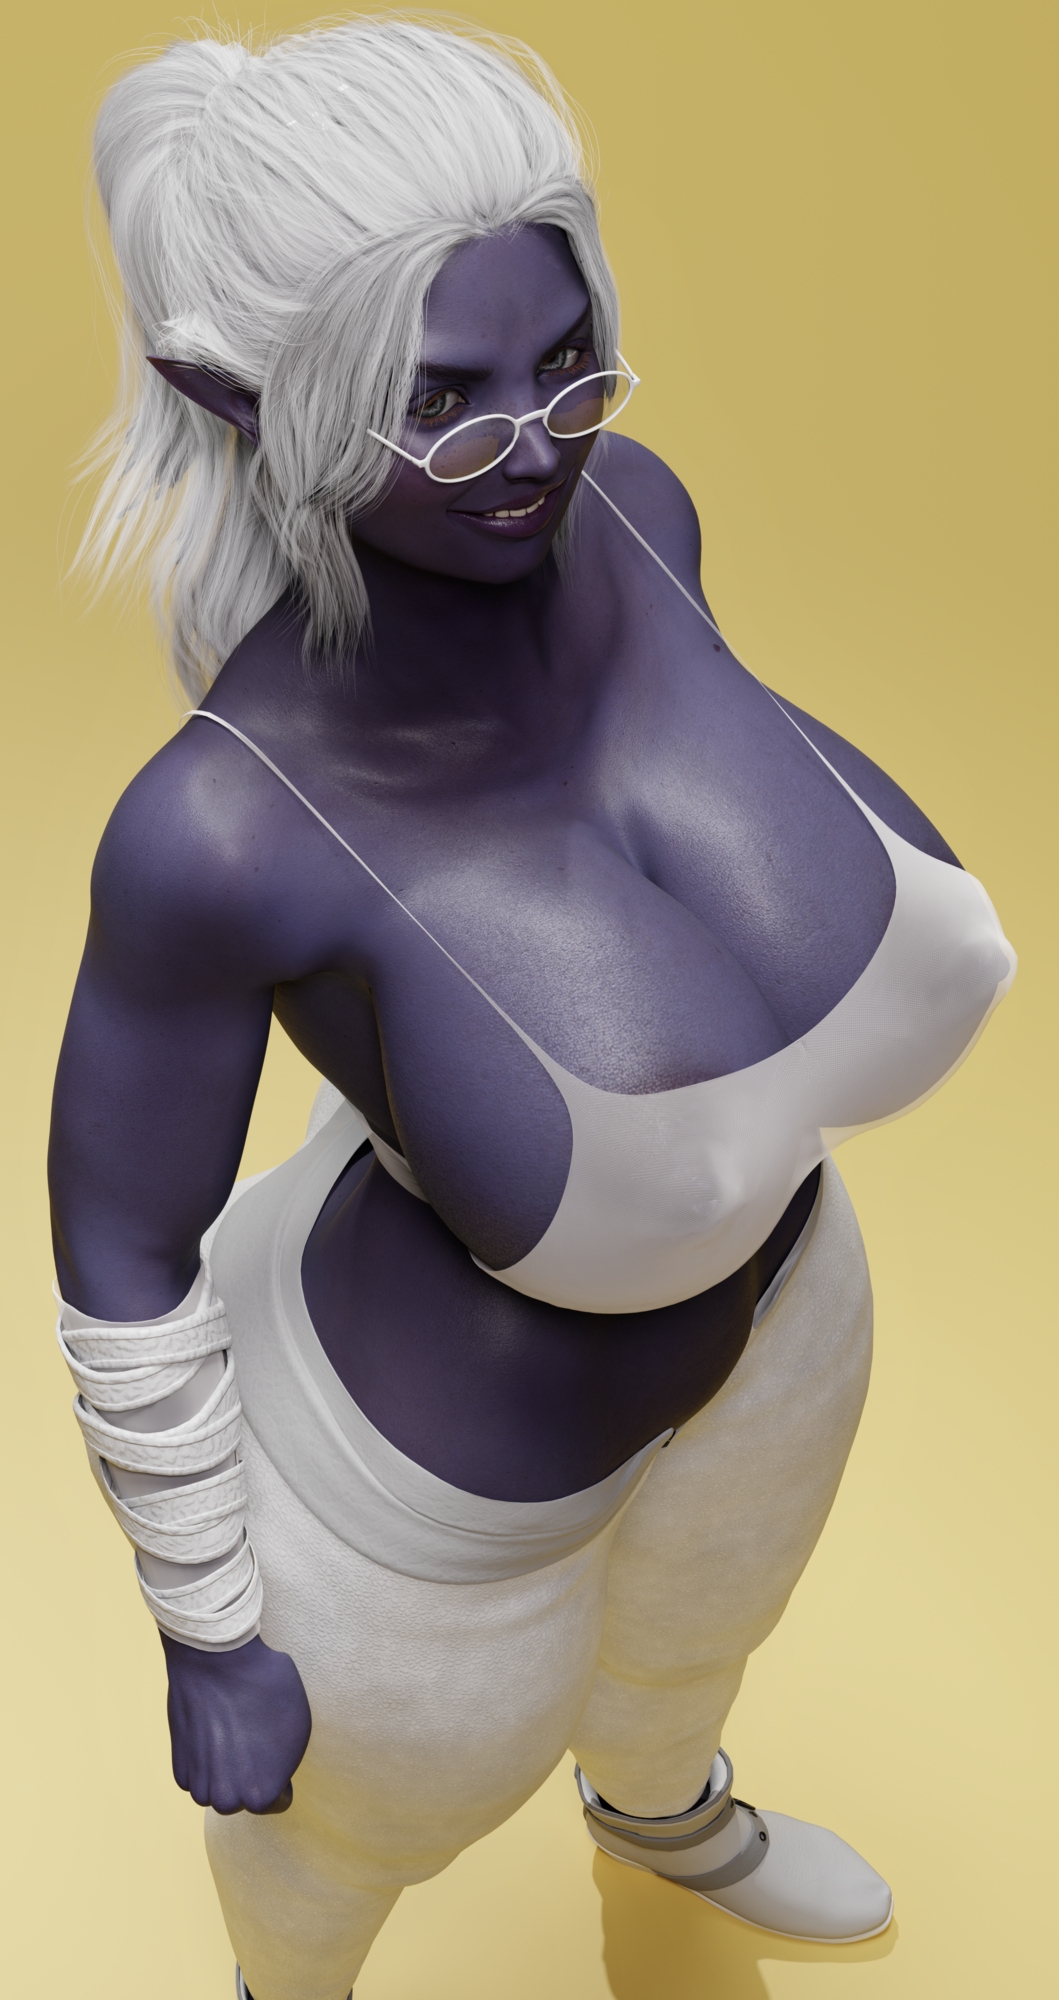 Stronk Elf  Big Breasts Big Tits Hips Thighs Glasses Huge Boobs Elf Erect Nipples Big Nipples Thicc Areola Tall Girl Ponytail Tight Top